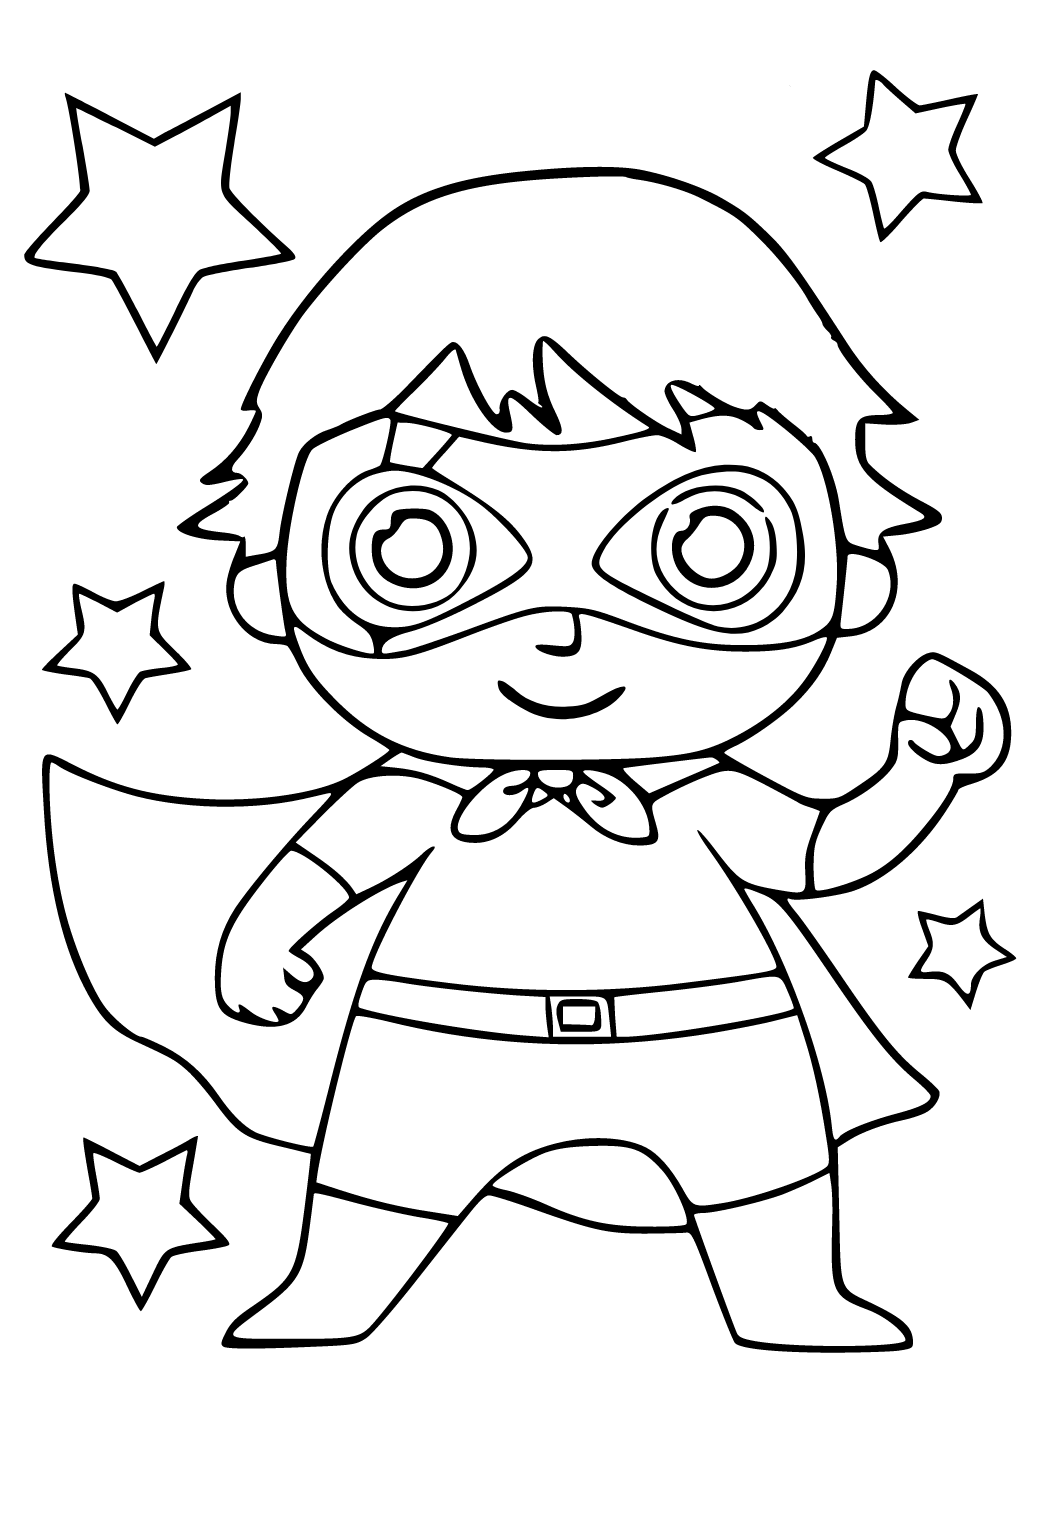 Free printable ryans world stars coloring page for adults and kids